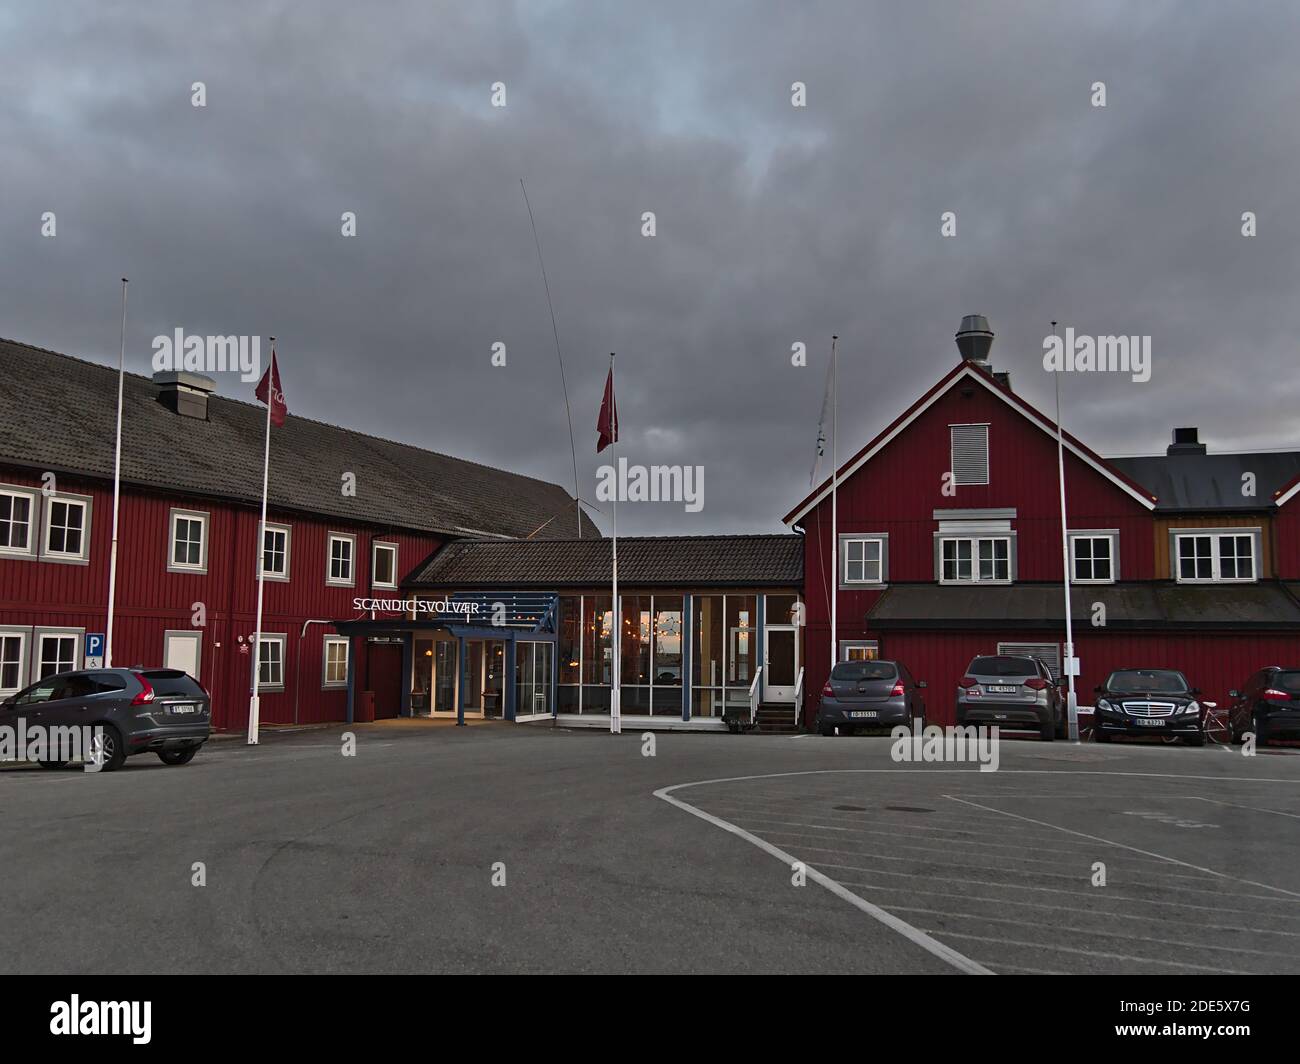 Svolvær, Austvågøya, Lofoten, Norway - 08-26-2020: Front view of main entrance of Scandic hotel in center of Svolvaer located in wooden red building. Stock Photo